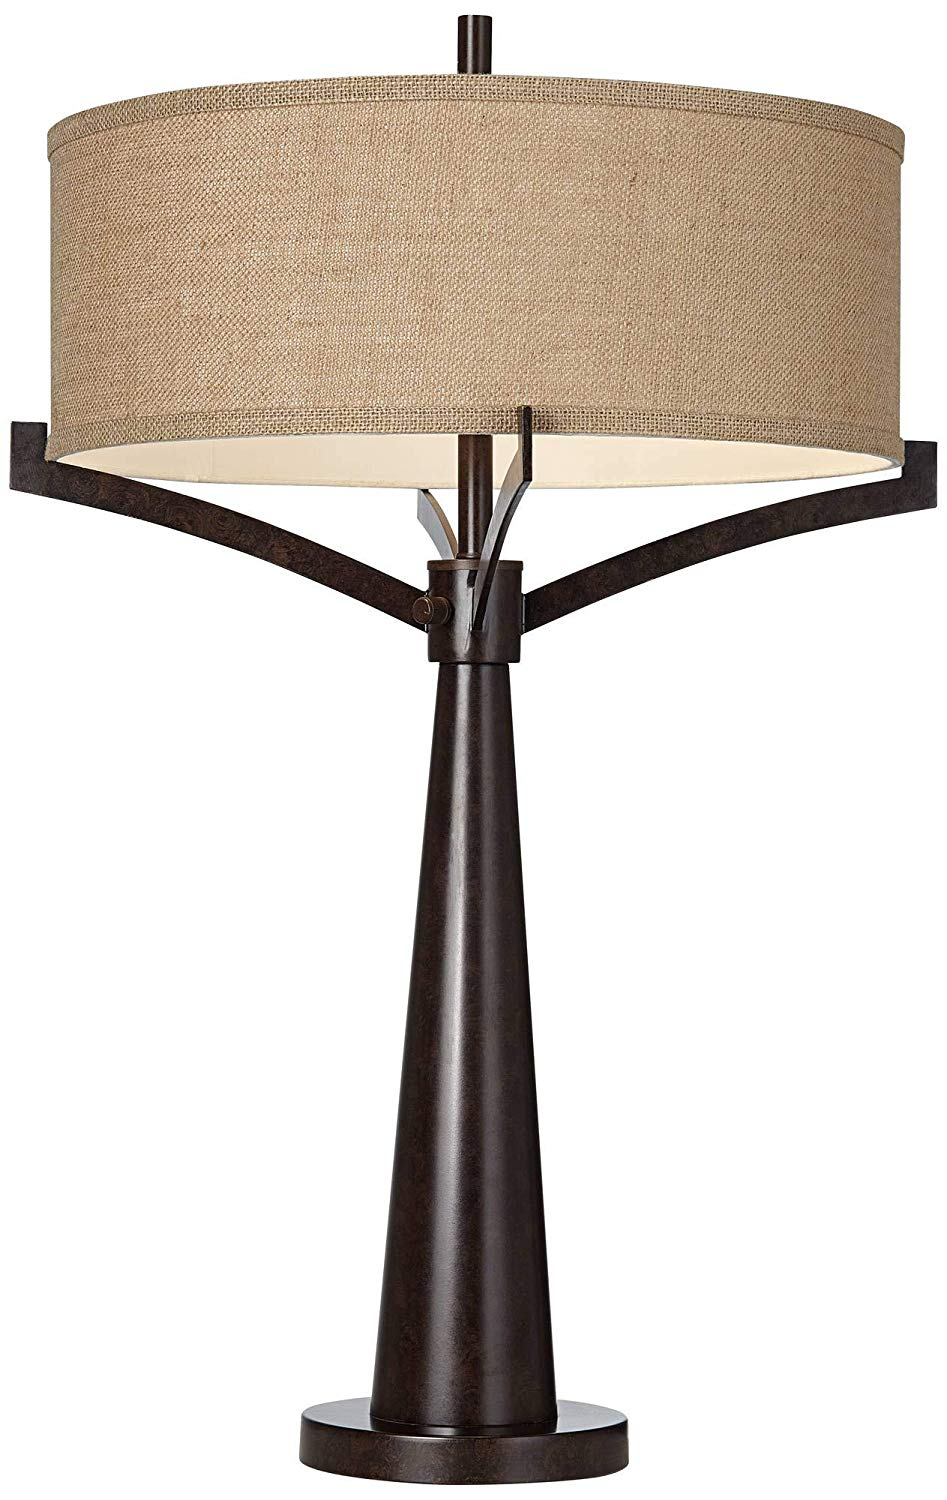 Tremont Mid Century Modern Table Lamp Rich Bronze Iron Burlap Fabric Drum Shade For Living Room Family Bedroom Bedside Franklin Iron Works Wederz with regard to measurements 947 X 1500